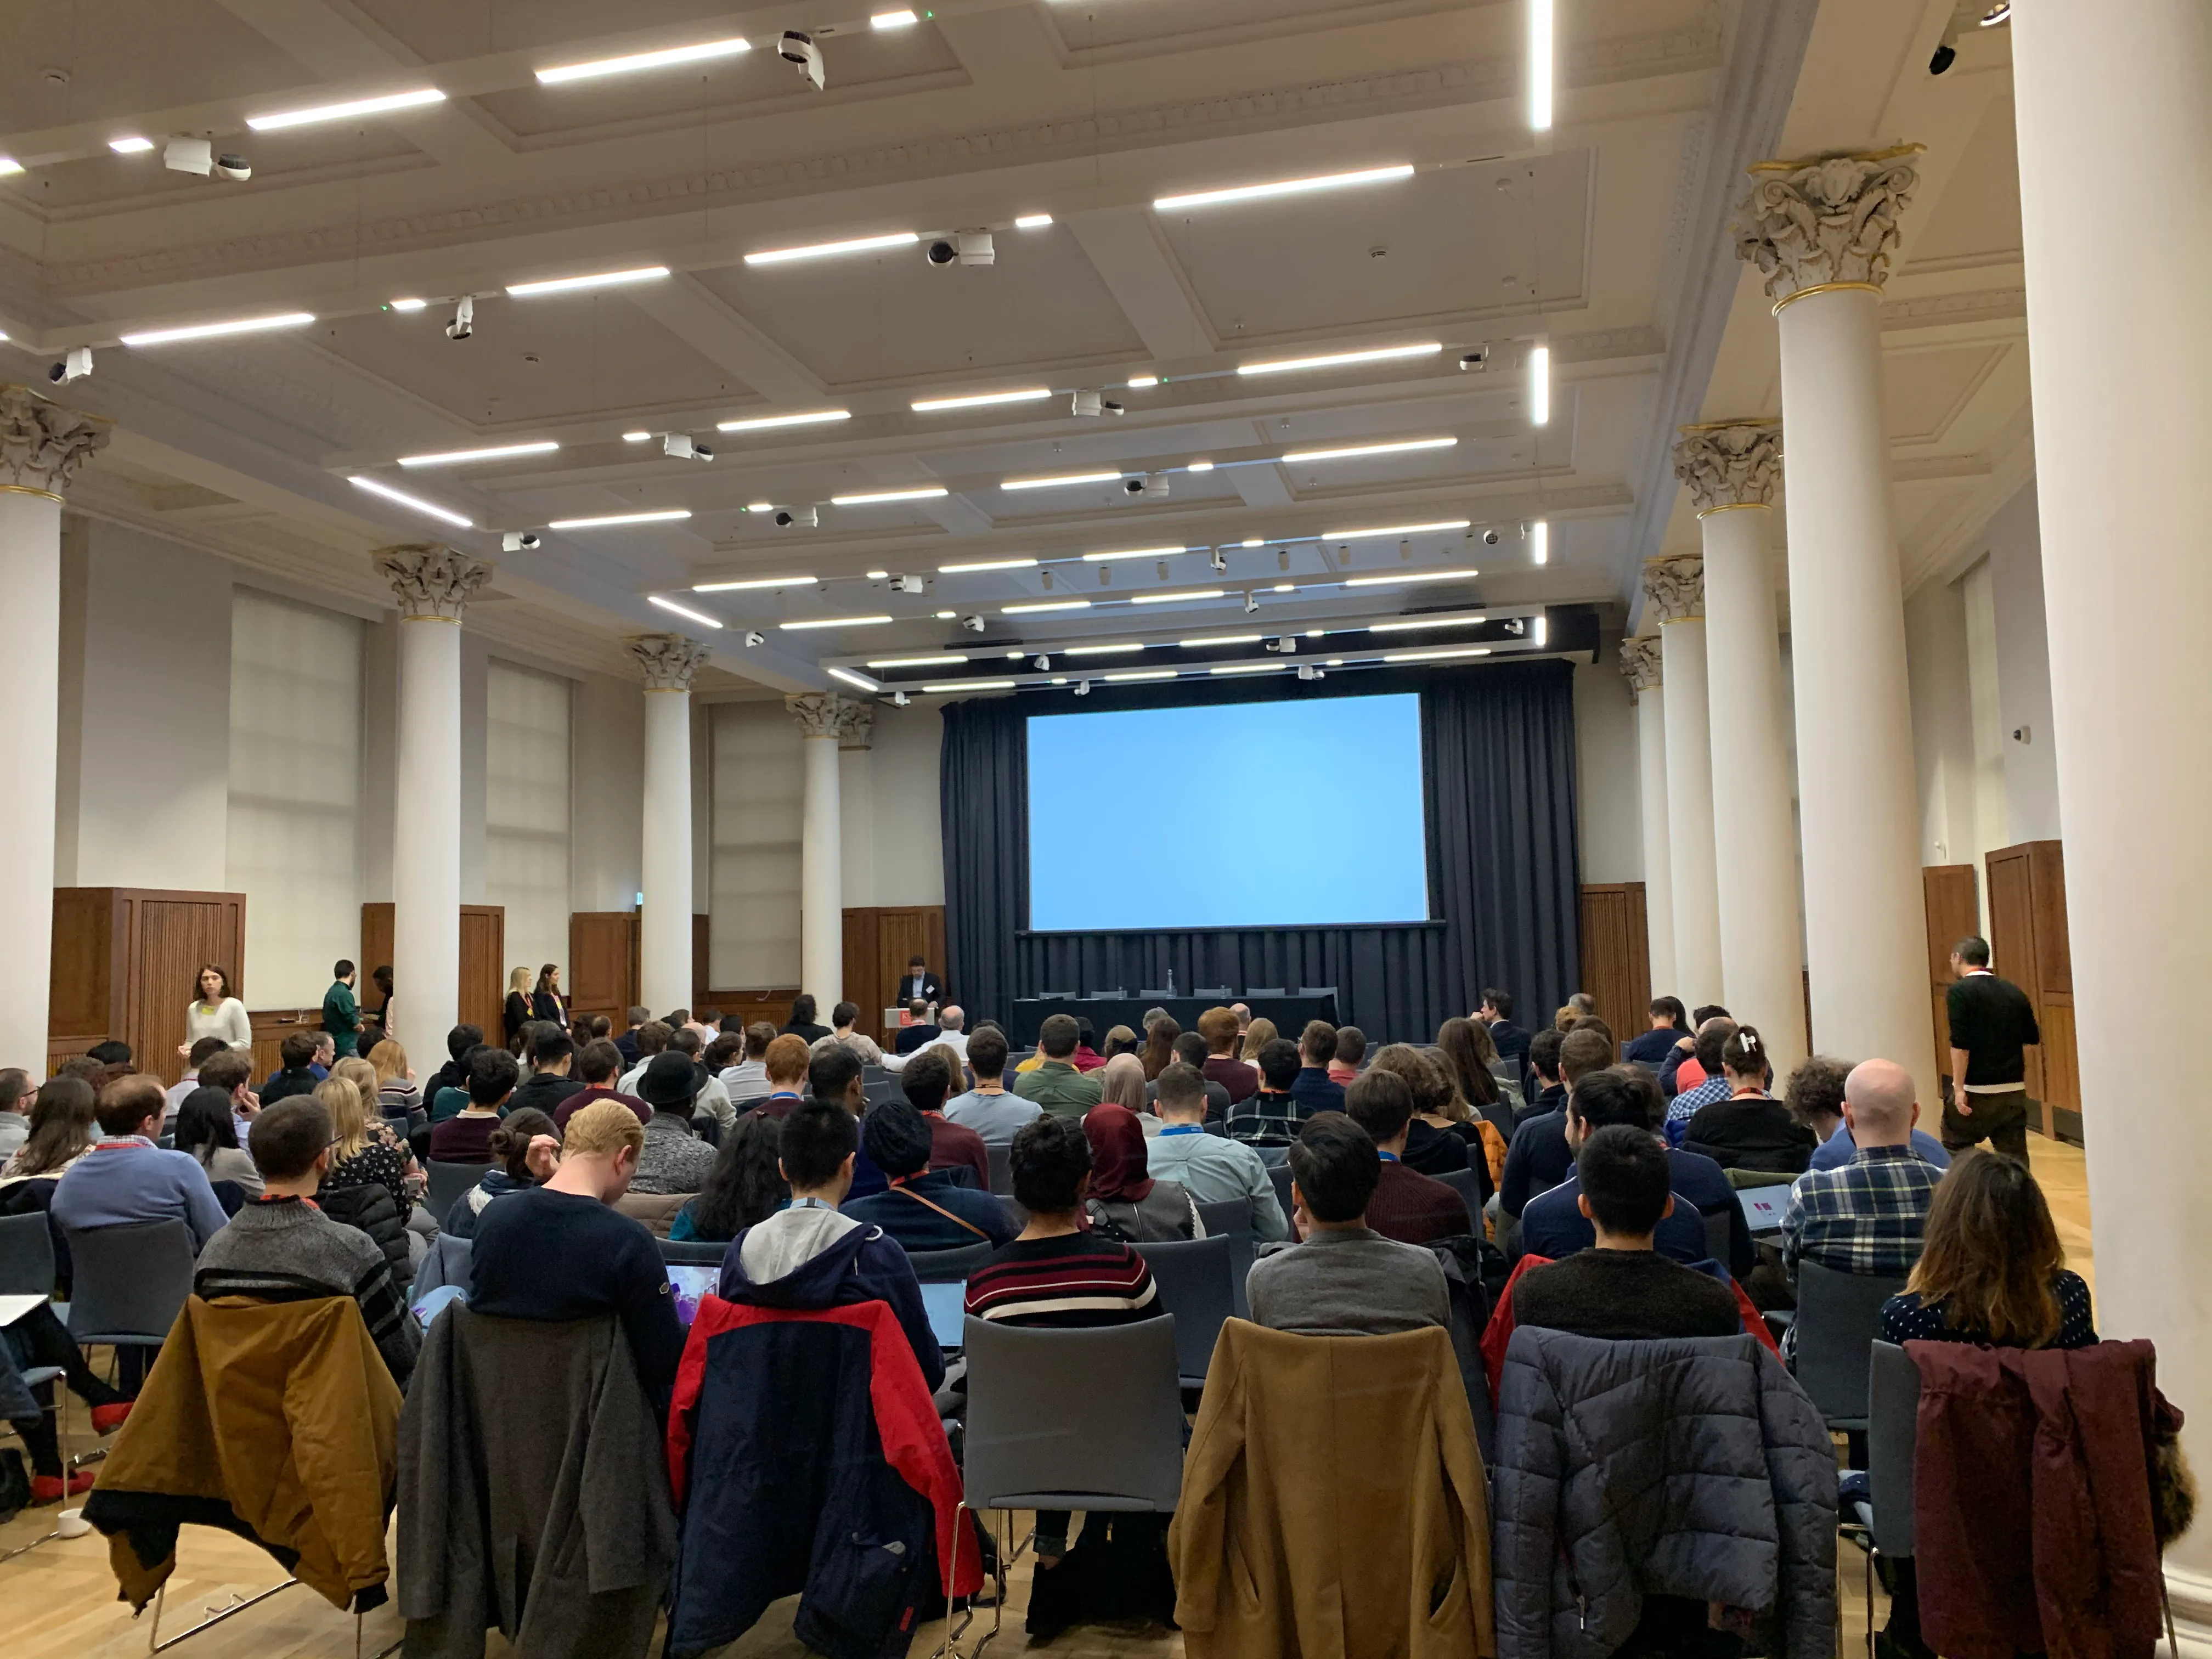 Attendees of the 2019 Postgraduate Research Symposium at The Great Hall, Strand Campus